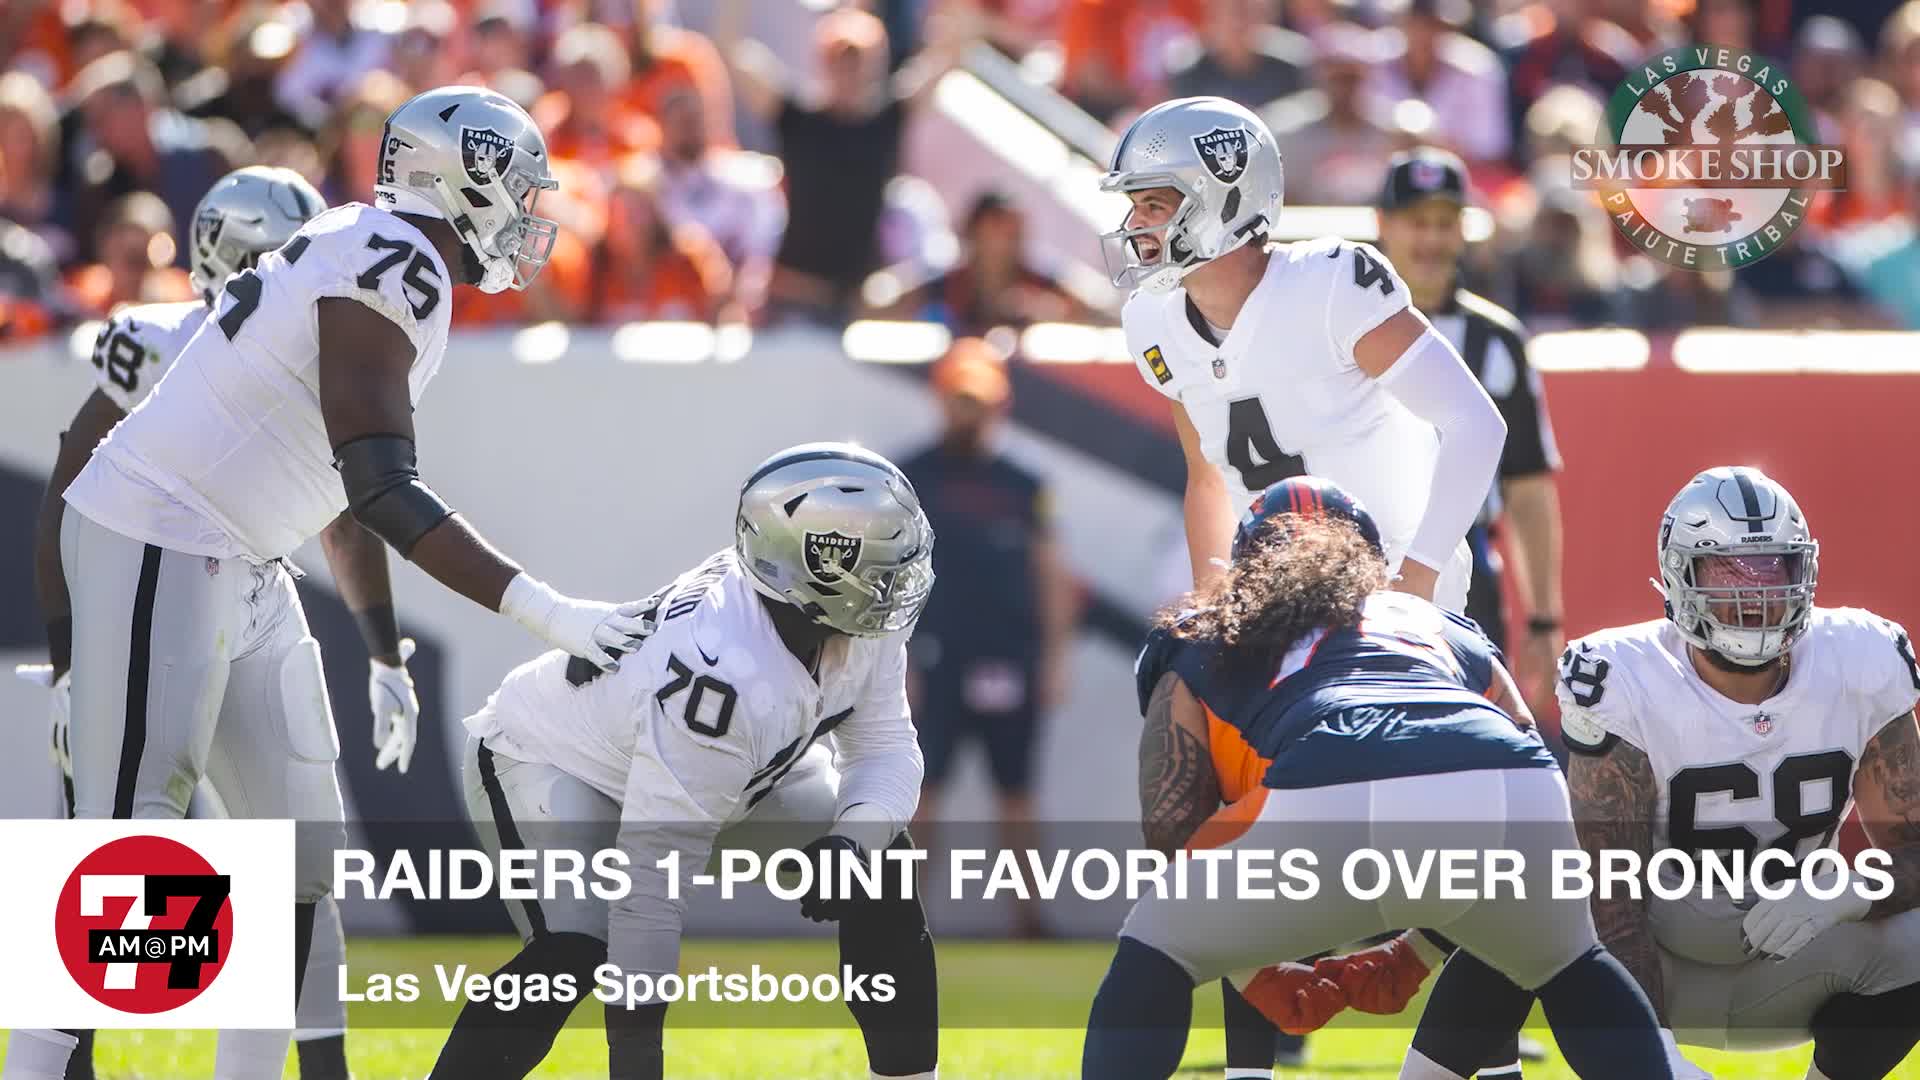 7@7PM Raiders Favored Over Broncos